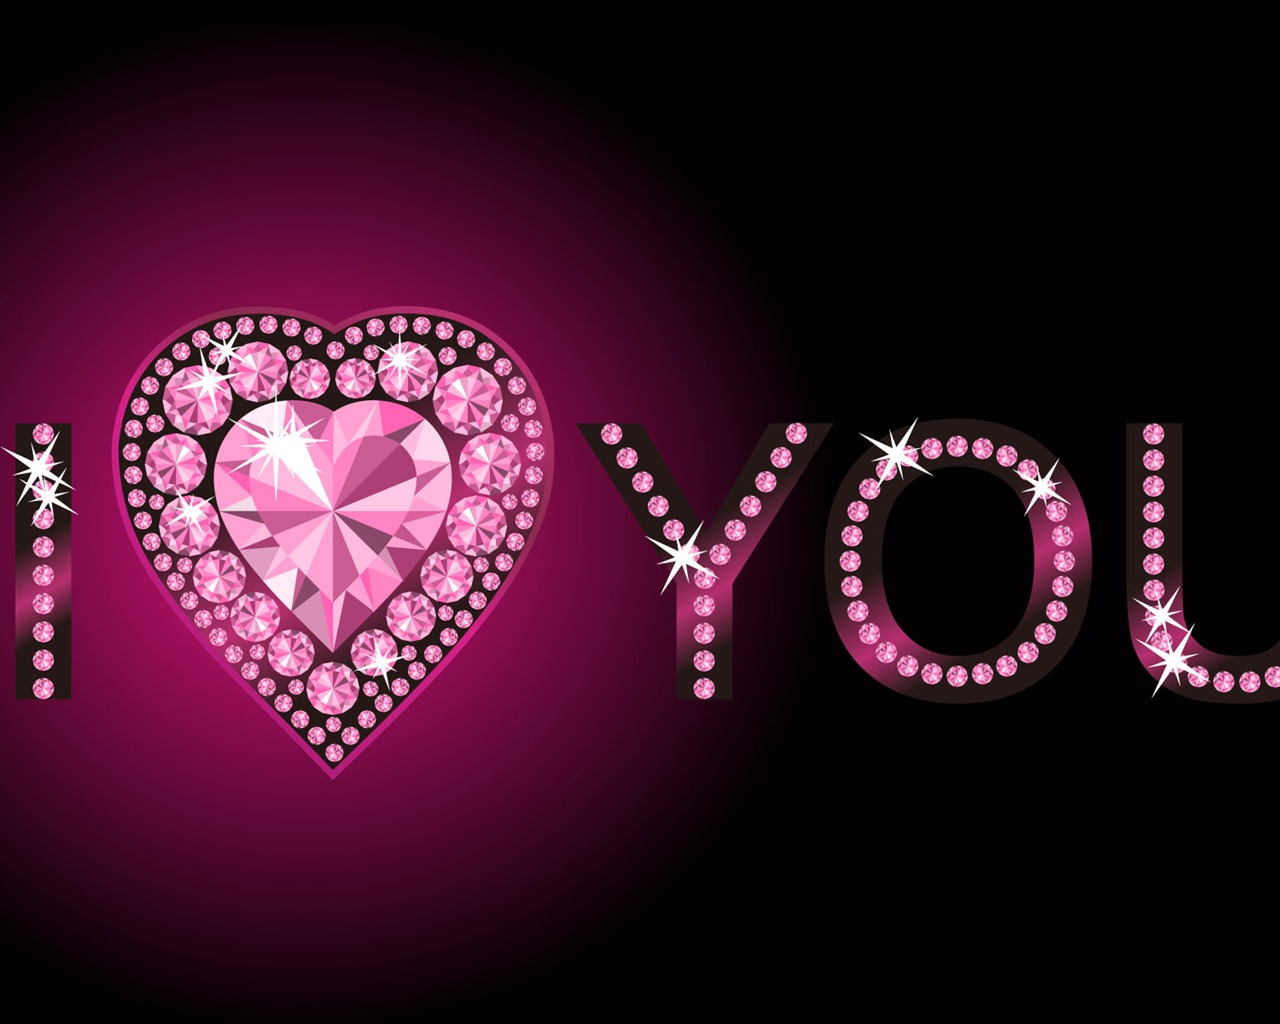 Valentine's Day Love Theme Wallpapers #21 - 1280x1024